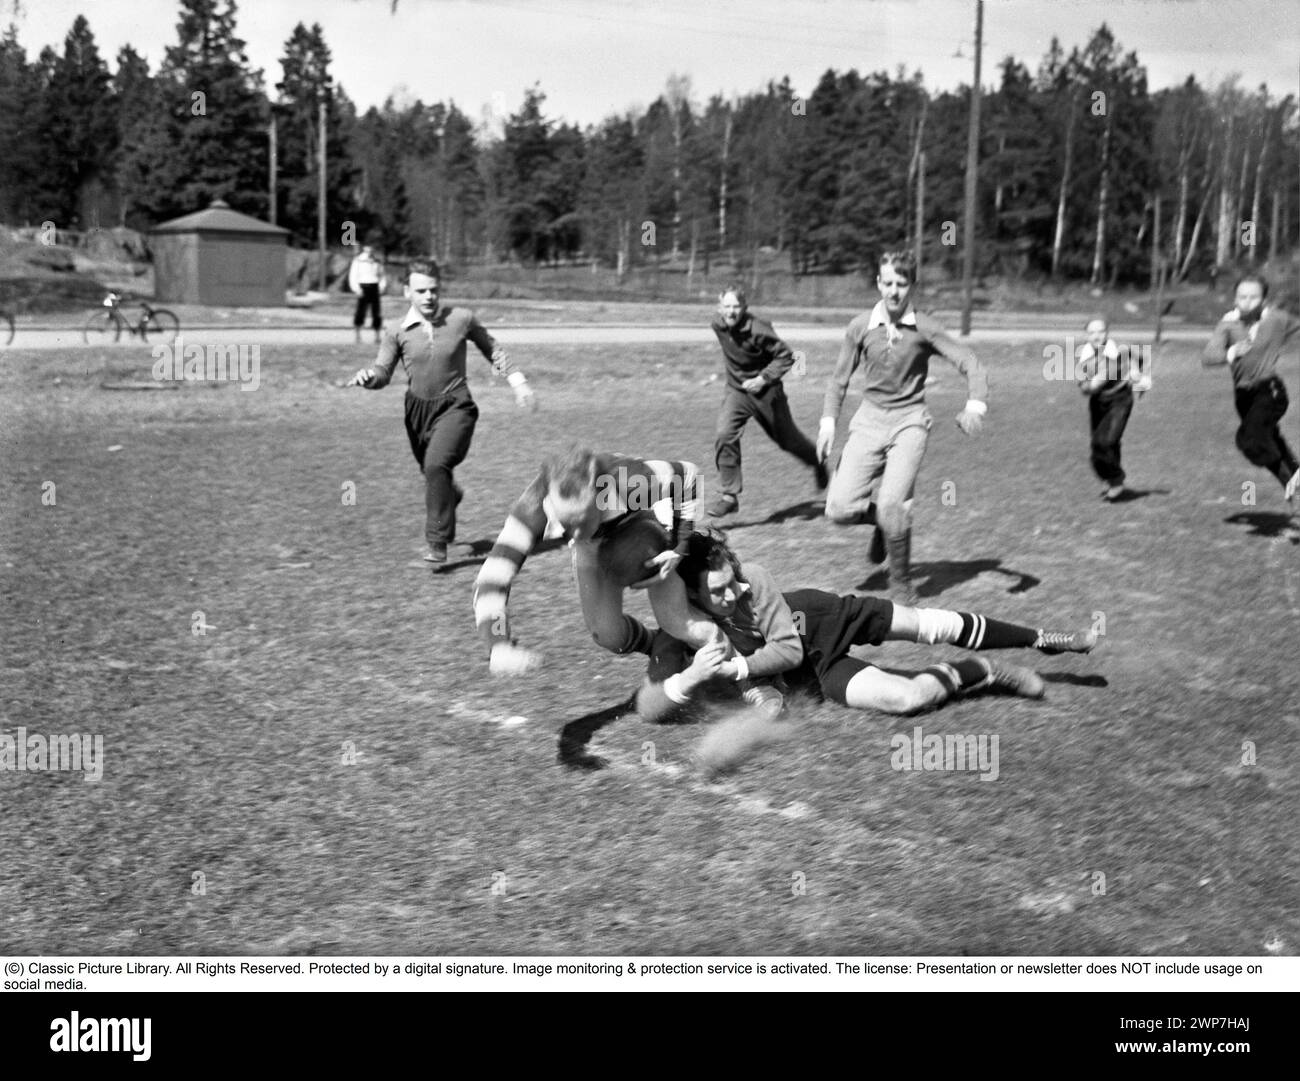 1940s rugby. A group of rugby players are practising on a sunny spring day. The player running with the rugby ball is seen being tackled and falling. Sweden May 2 1940. Kristoffersson ref 128-12 Stock Photo